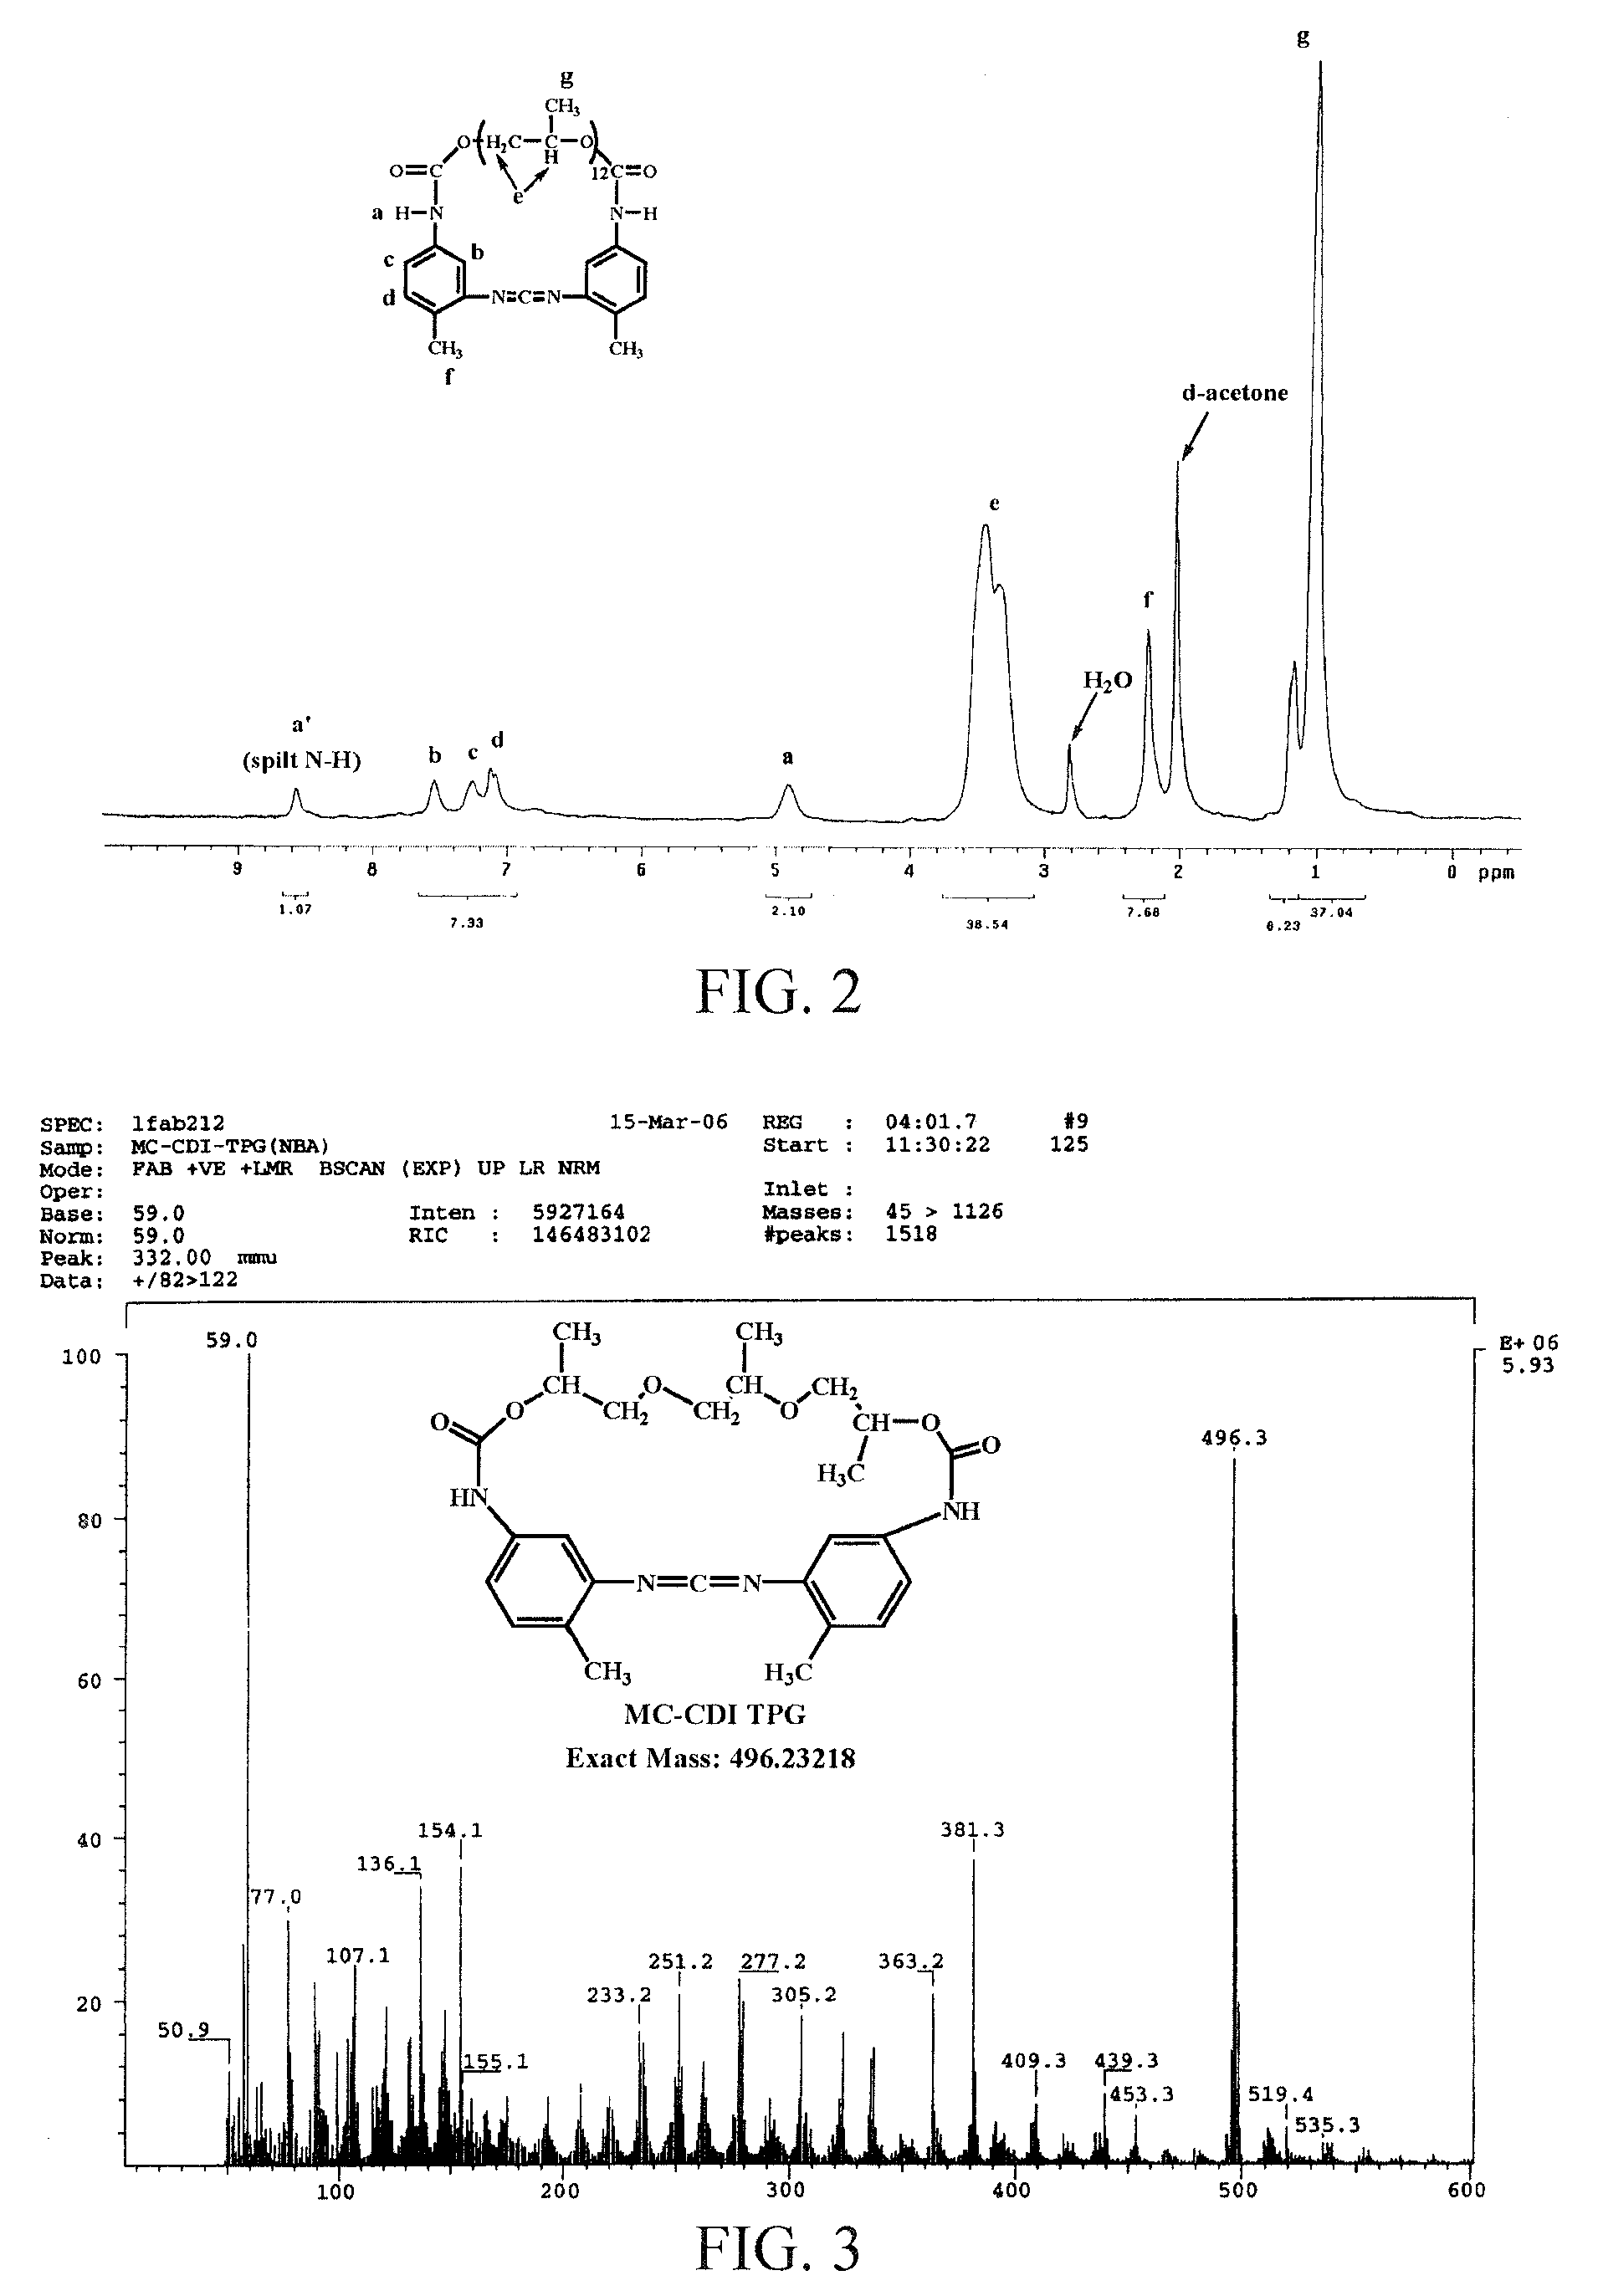 Macrocyclic carbodiimides (MC-CDI) and their derivatives, syntheses and applications of the same